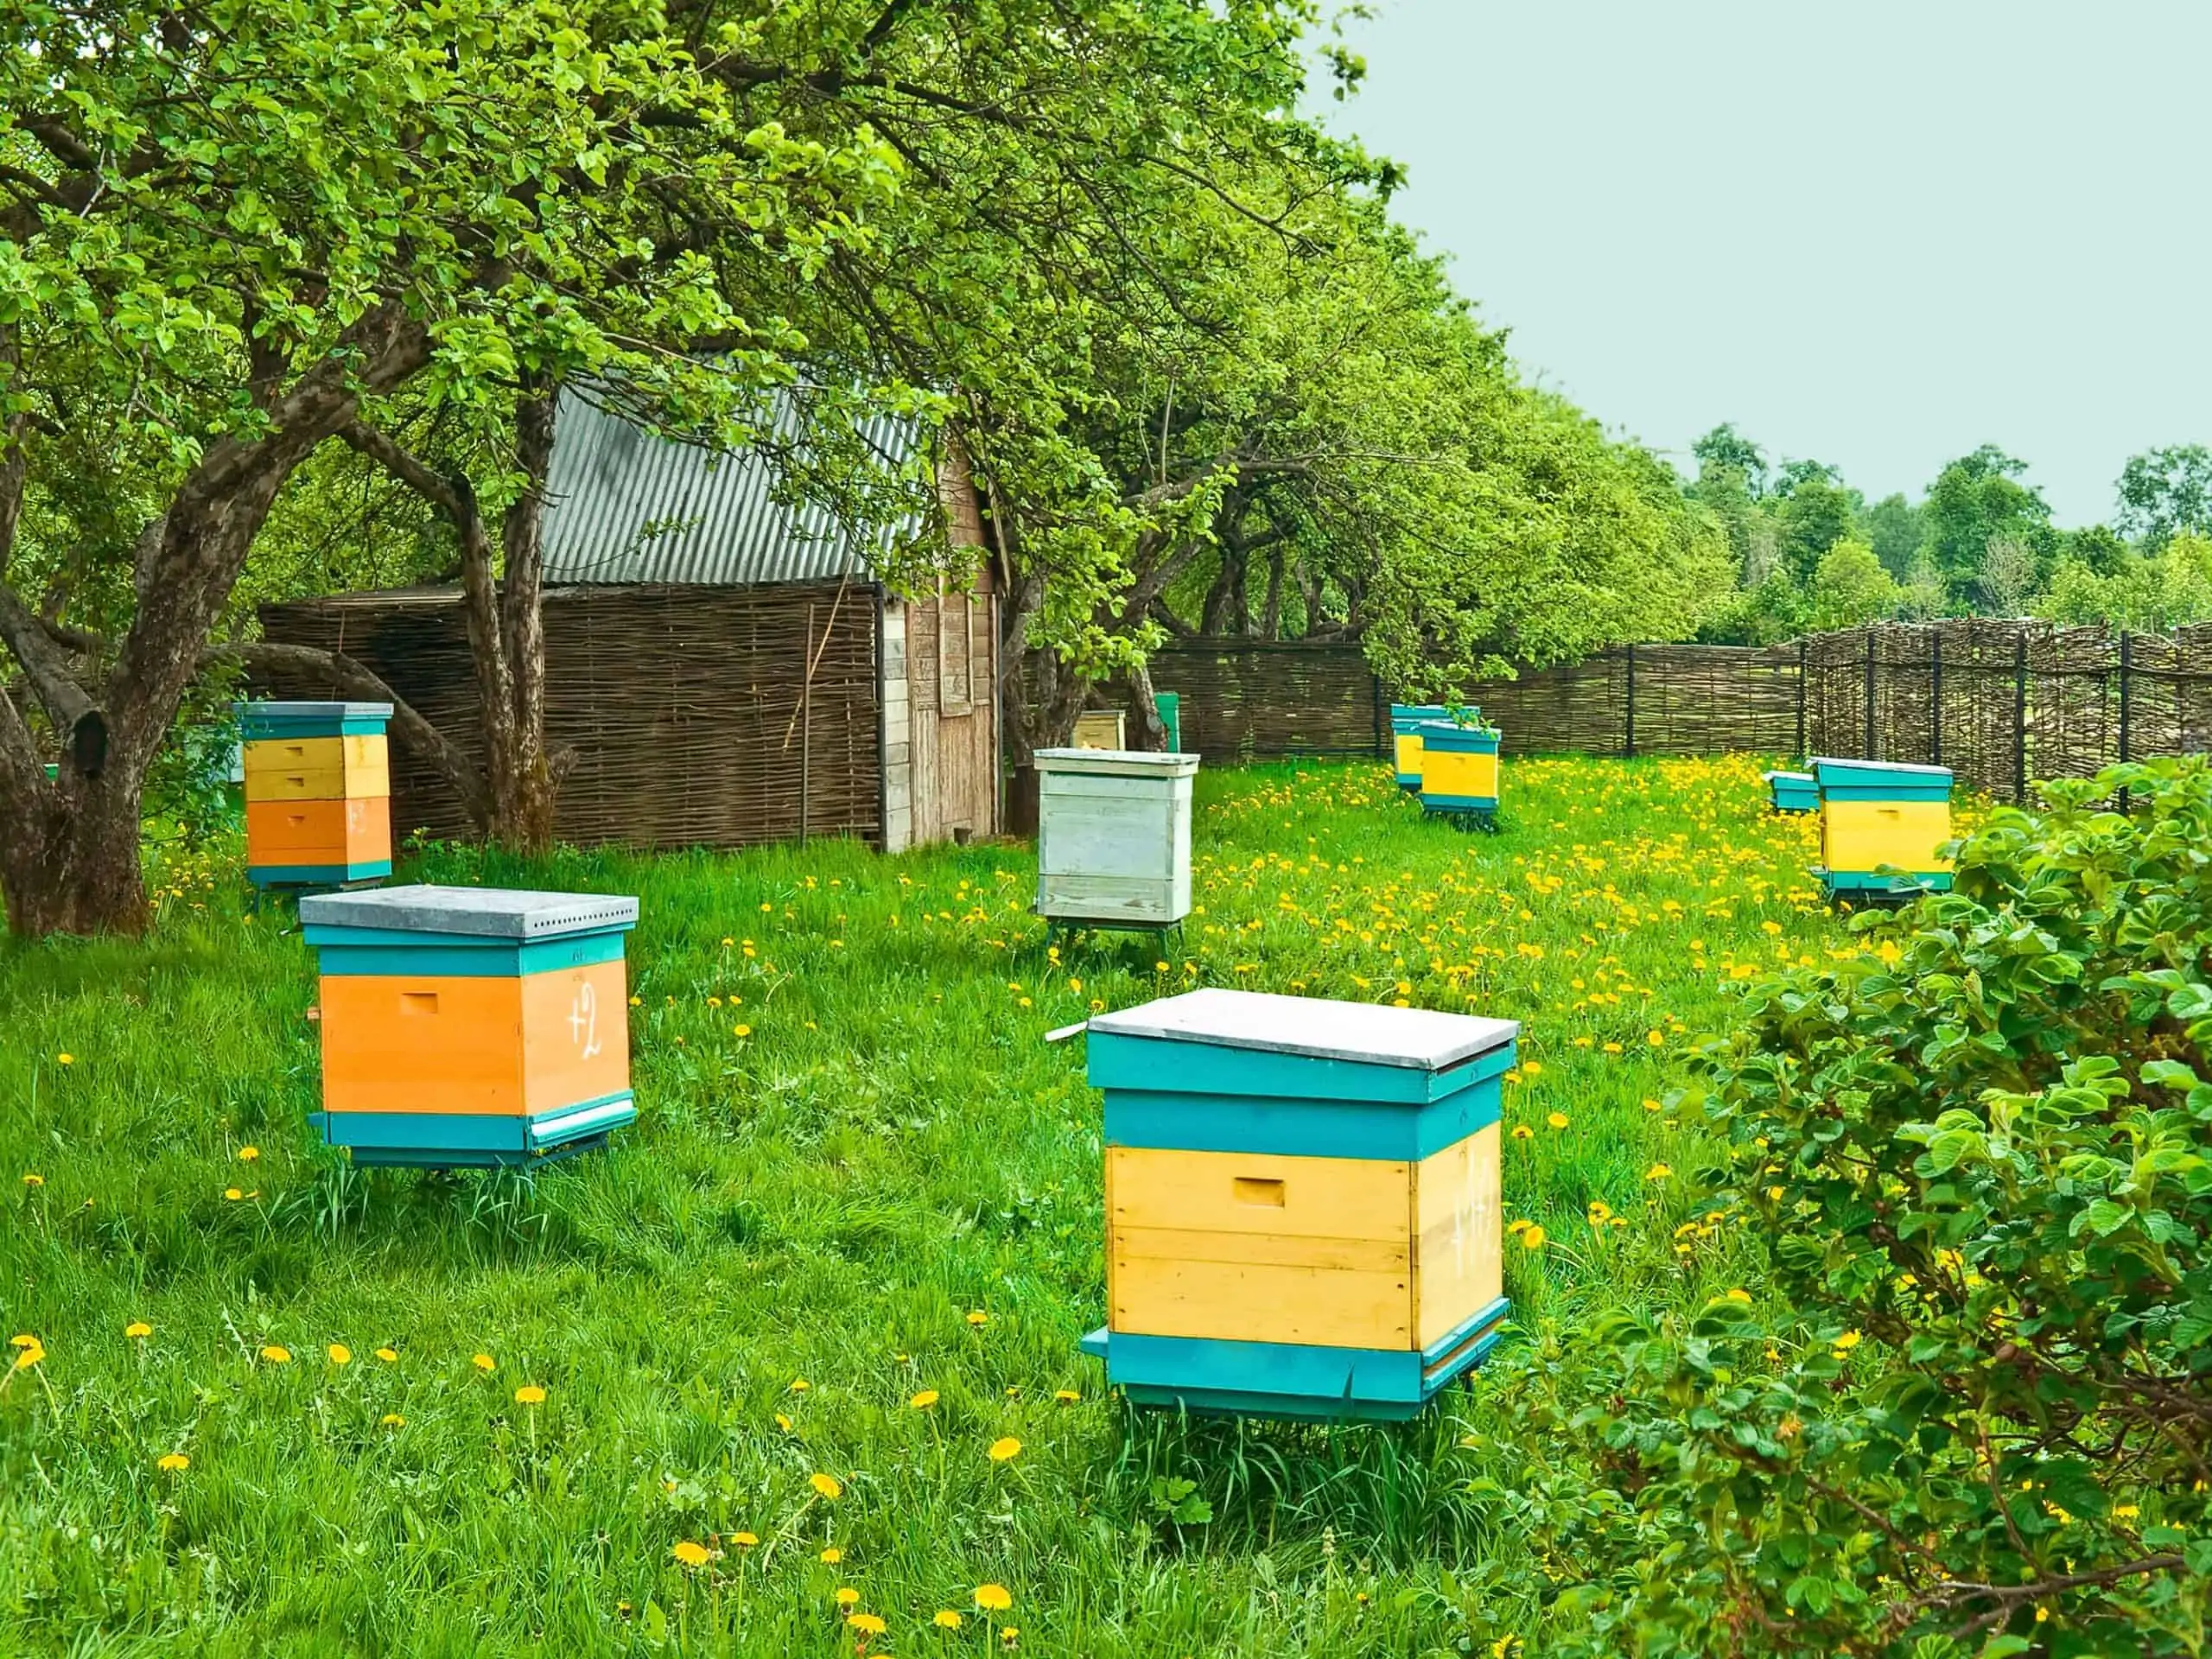 6 ways to join the beekeeping community - PerfectBee